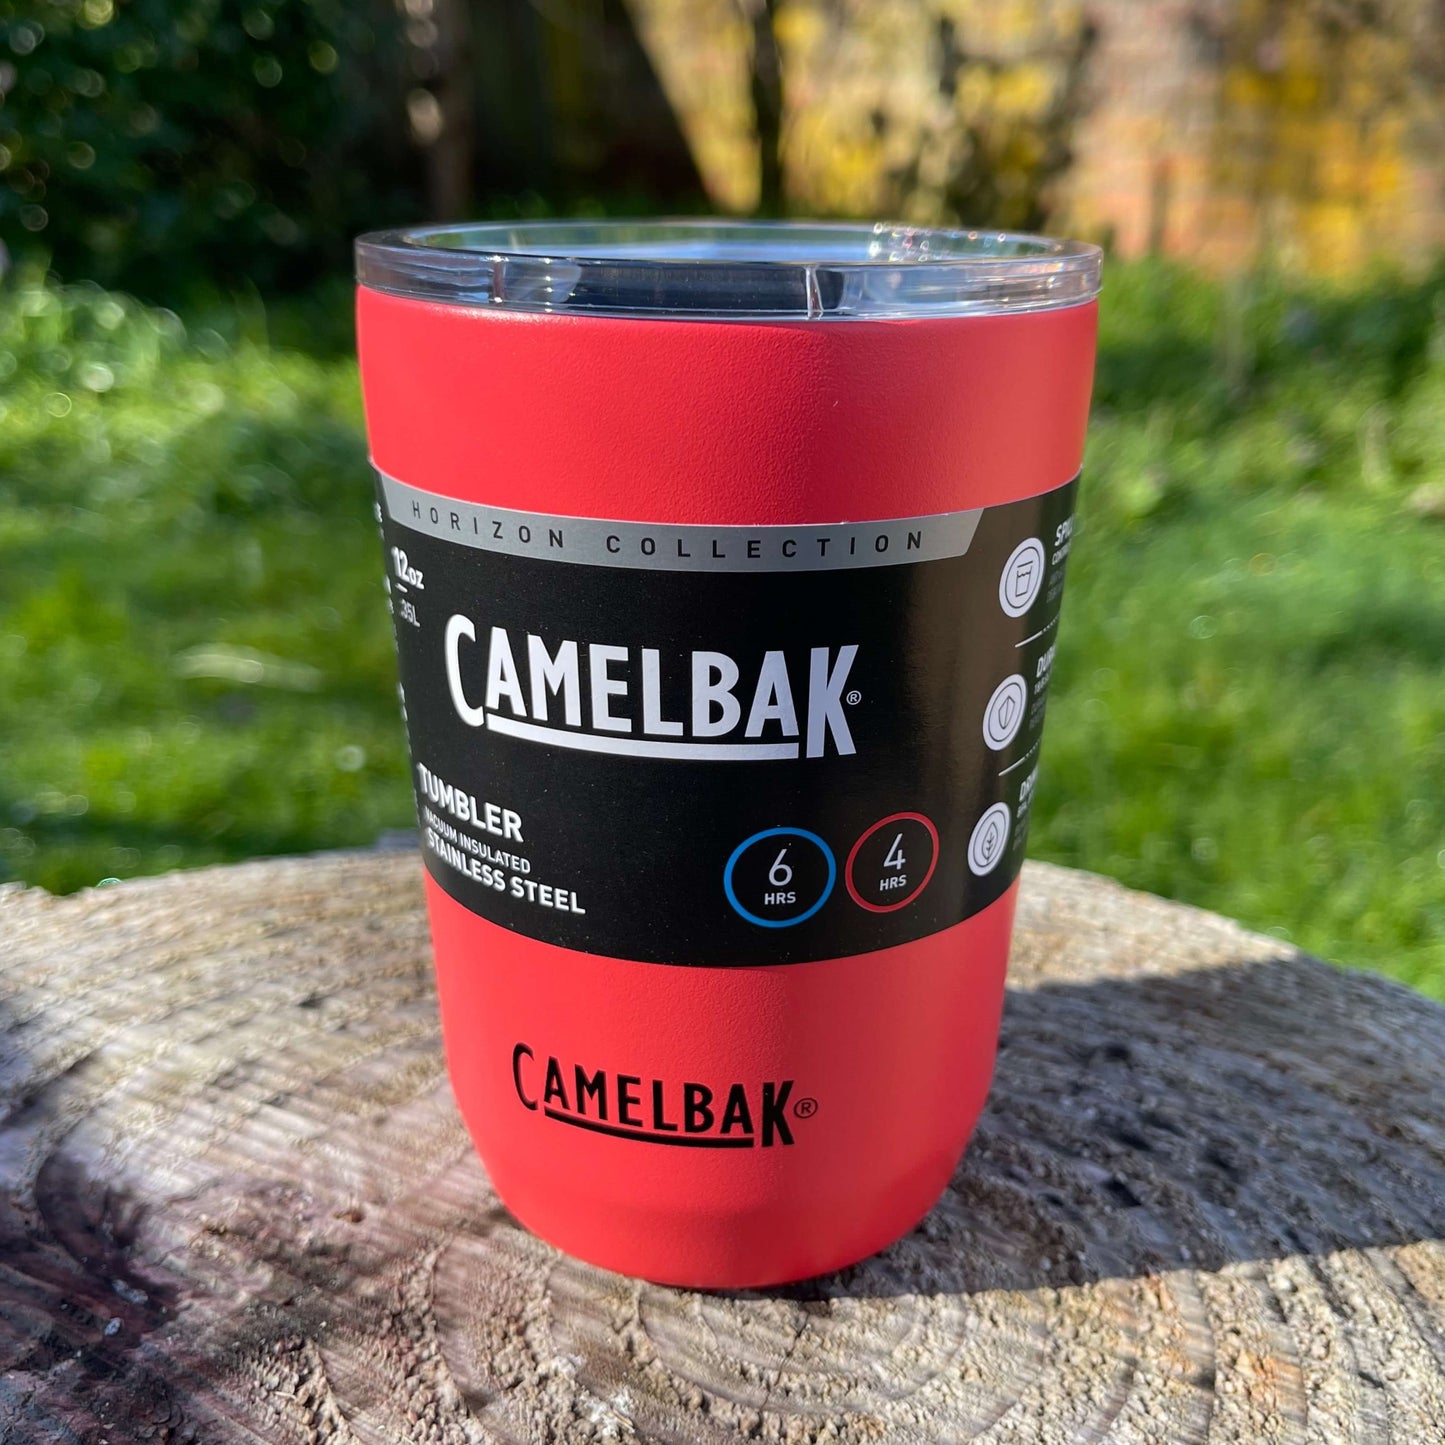 Stainless steel coffee tumbler from Camelbak in a strawberry red colour.